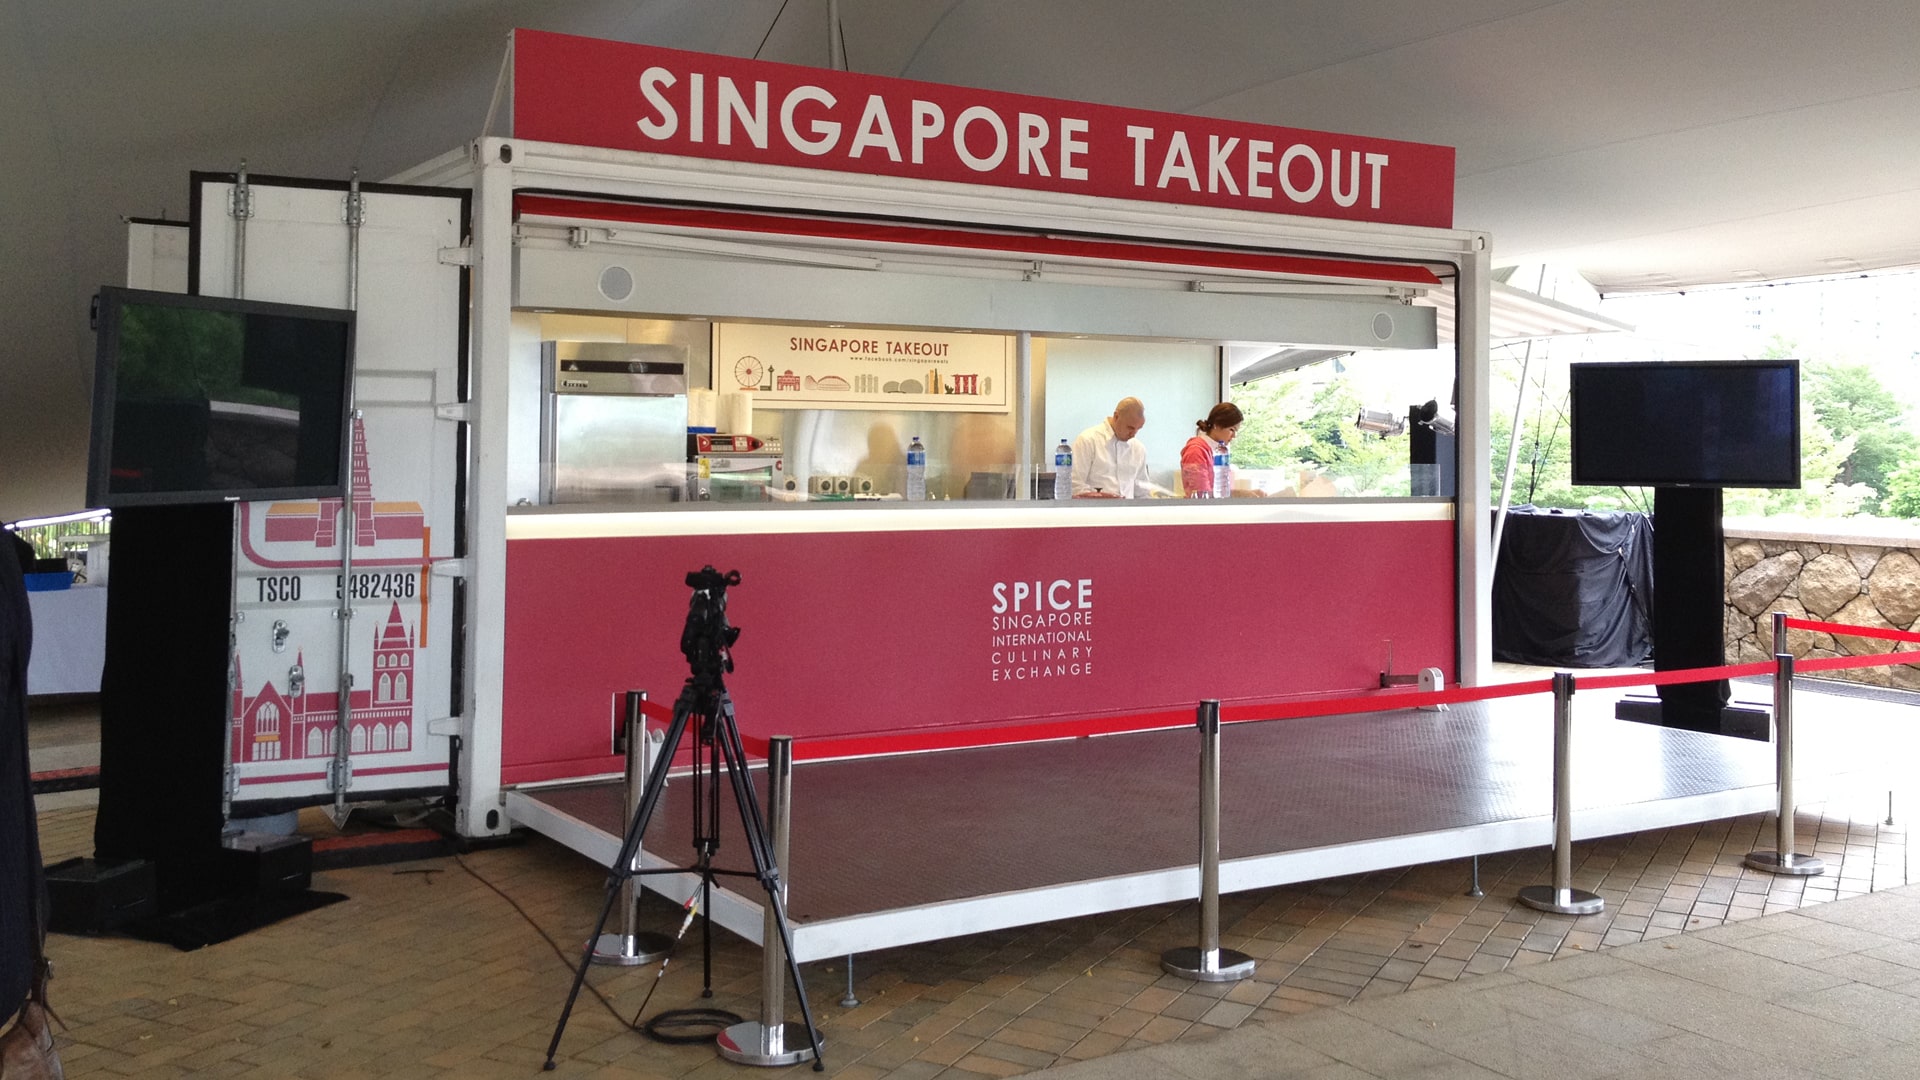 tsc_opt-images_customized-containers_singapore-takeout-hongkong-1920x1080-01-min